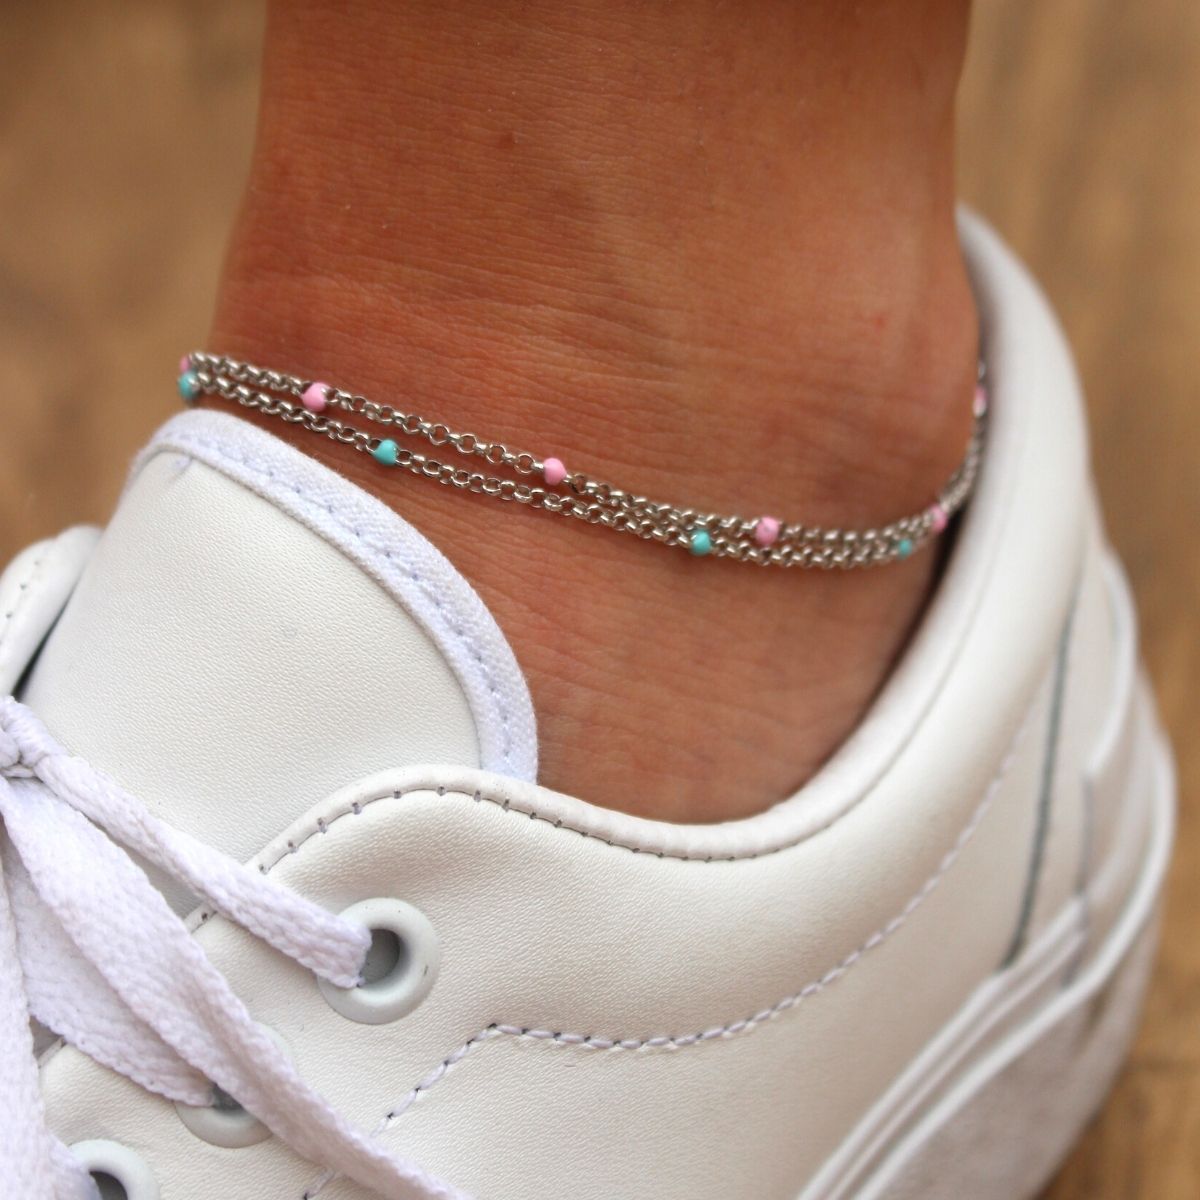 SILVER ANKLE BRACELET AND TURQUOISE BALLS